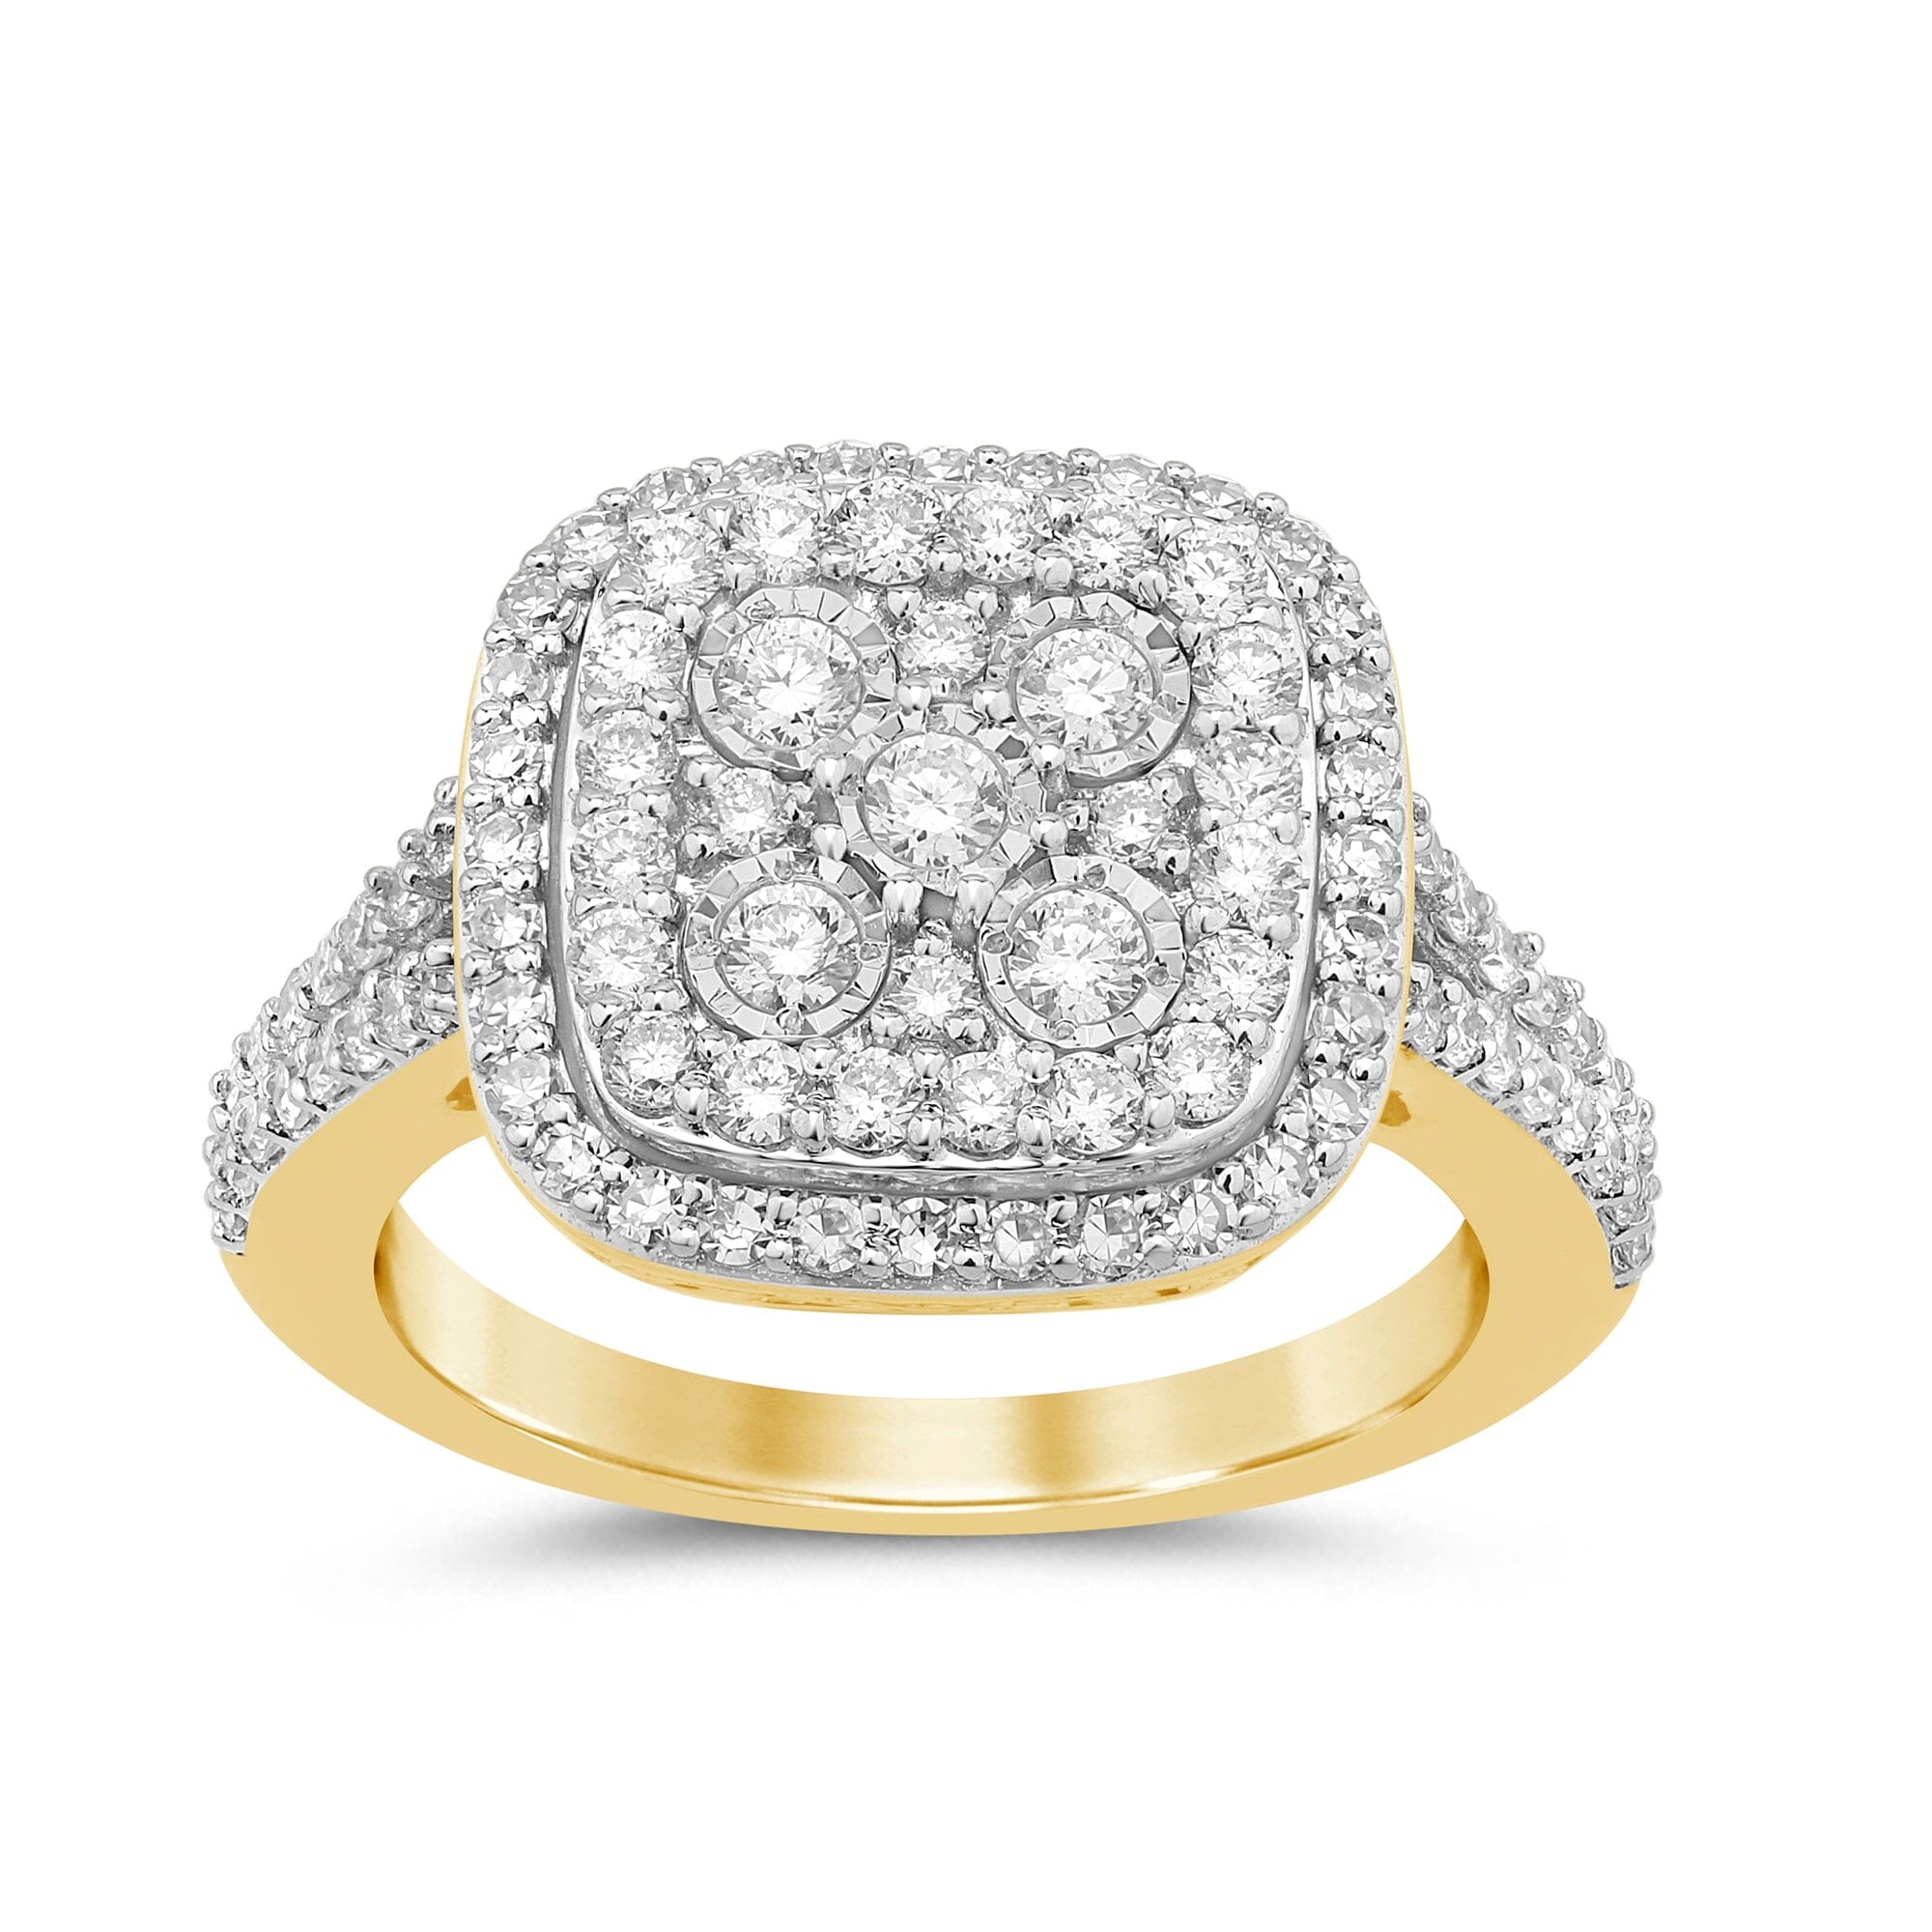 Meera Square Look Halo Ring with 1.00ct of Laboratory Grown Diamonds in 9ct Yellow Gold Rings Bevilles 